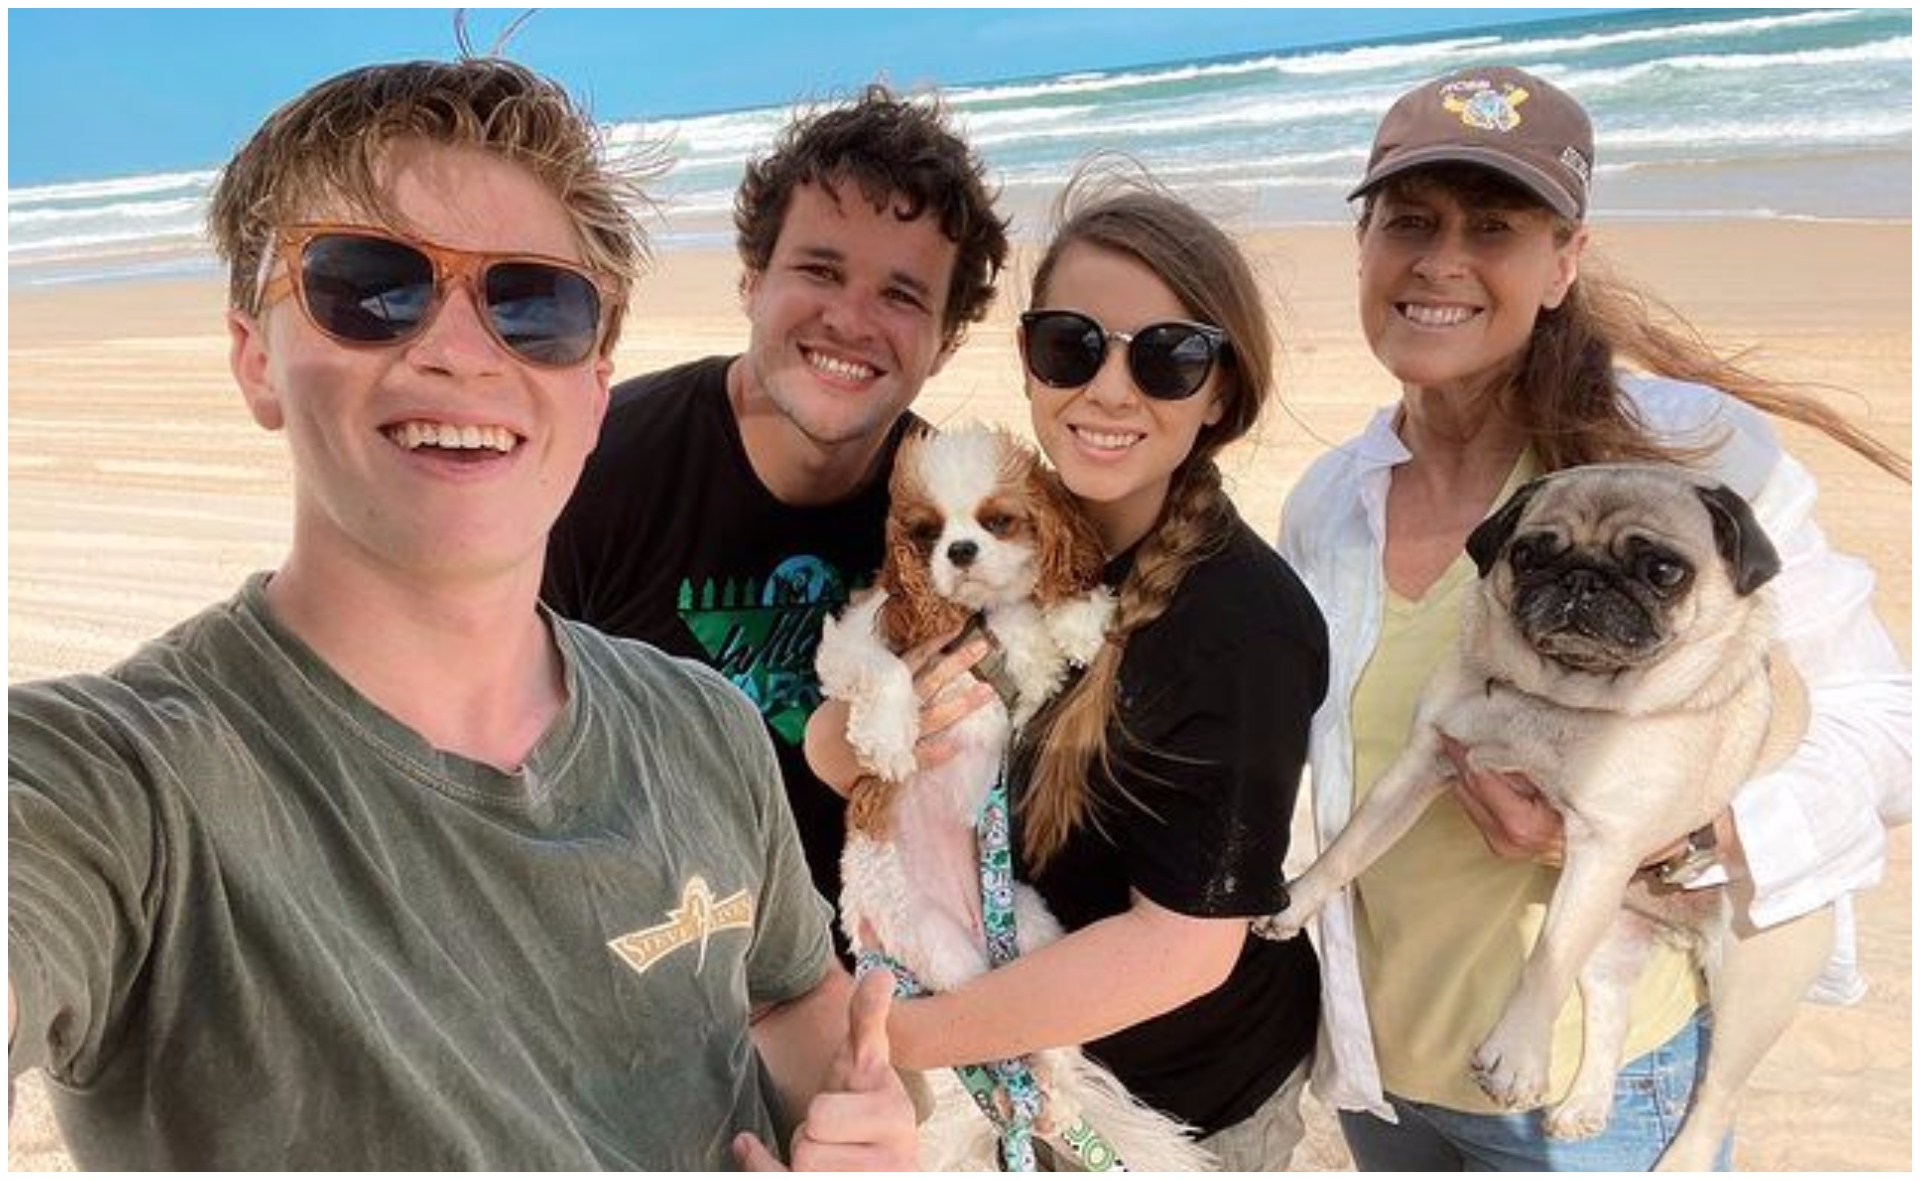 Pregnant Bindi Irwin shares a special moment with her nearest and dearest as she prepares to welcome her baby girl